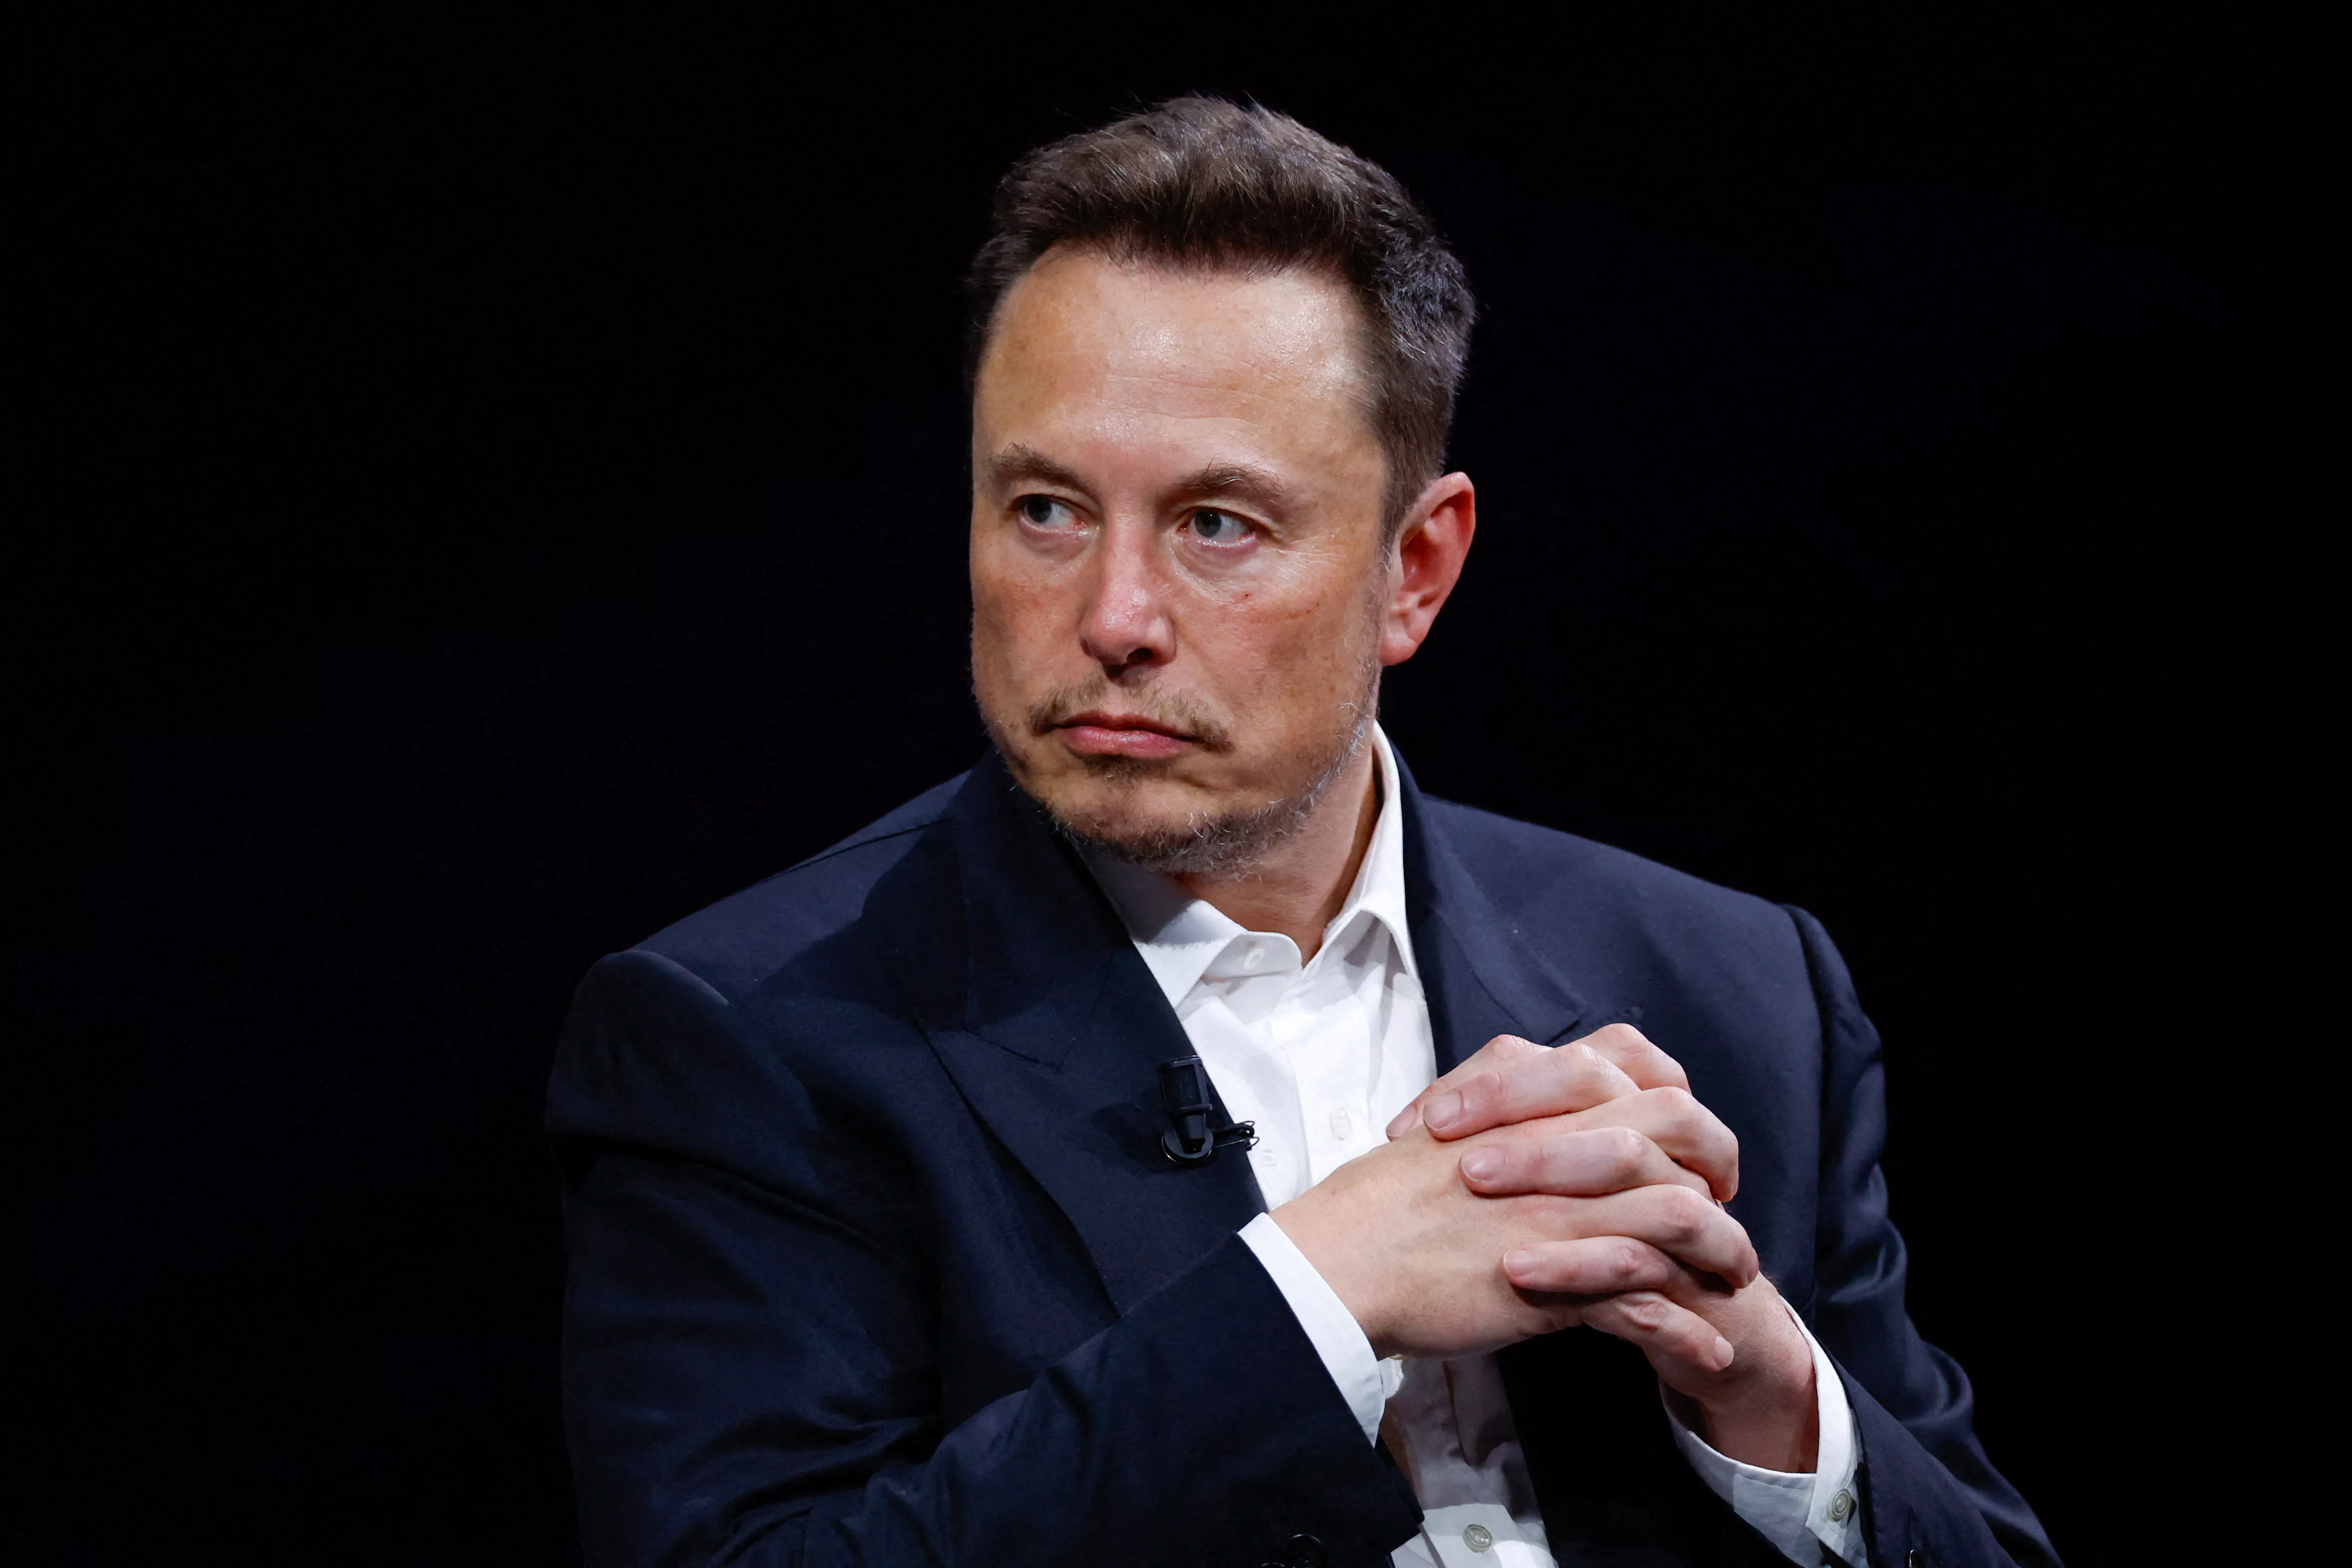 file-photo-tesla-ceo-and-x-owner-elon-musk-attends-the-vivatech-conference-in-paris